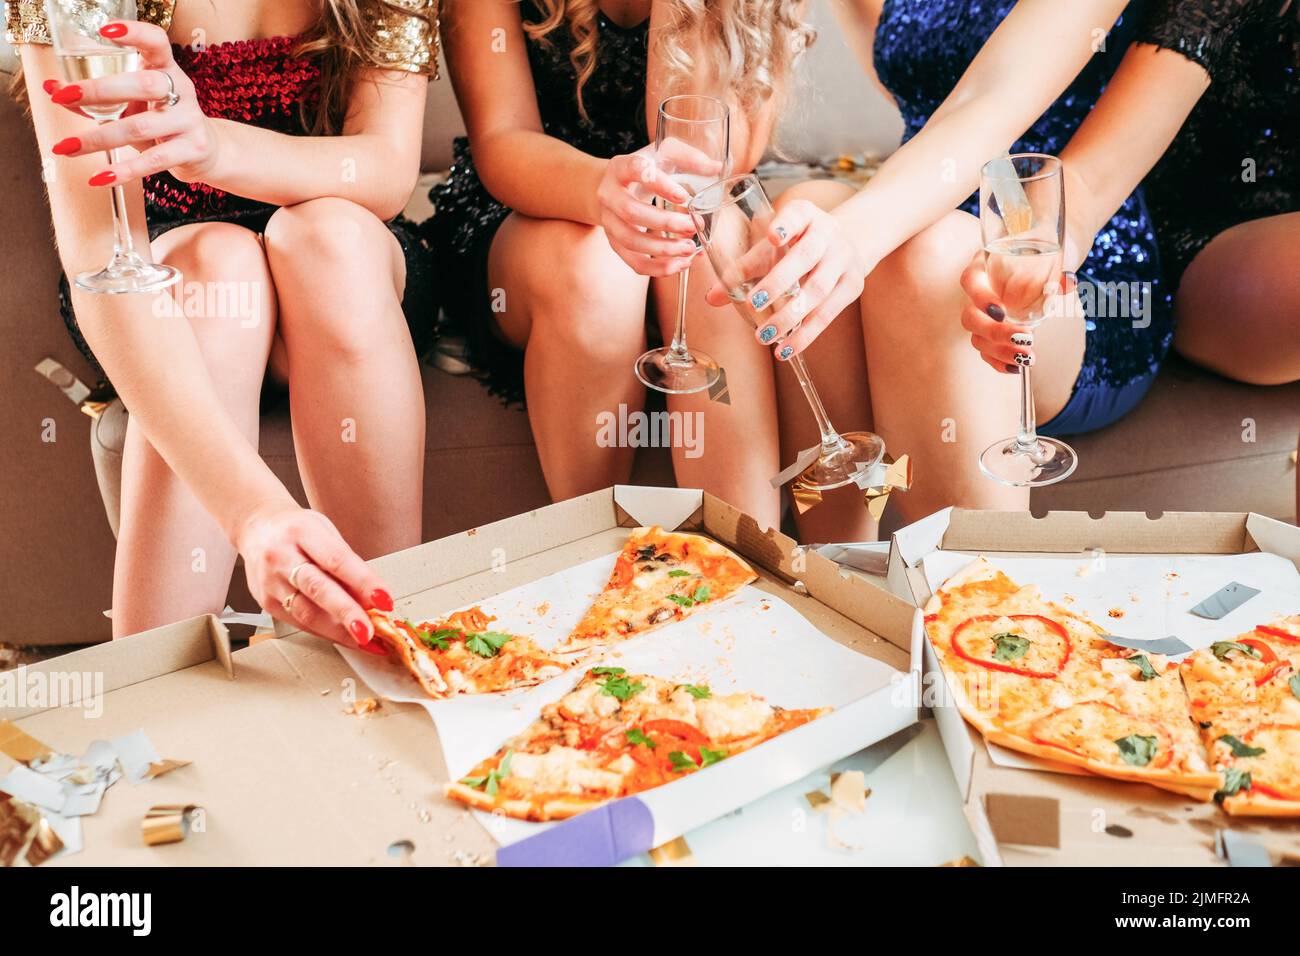 fancy party girls pizza champagne hangout Stock Photo